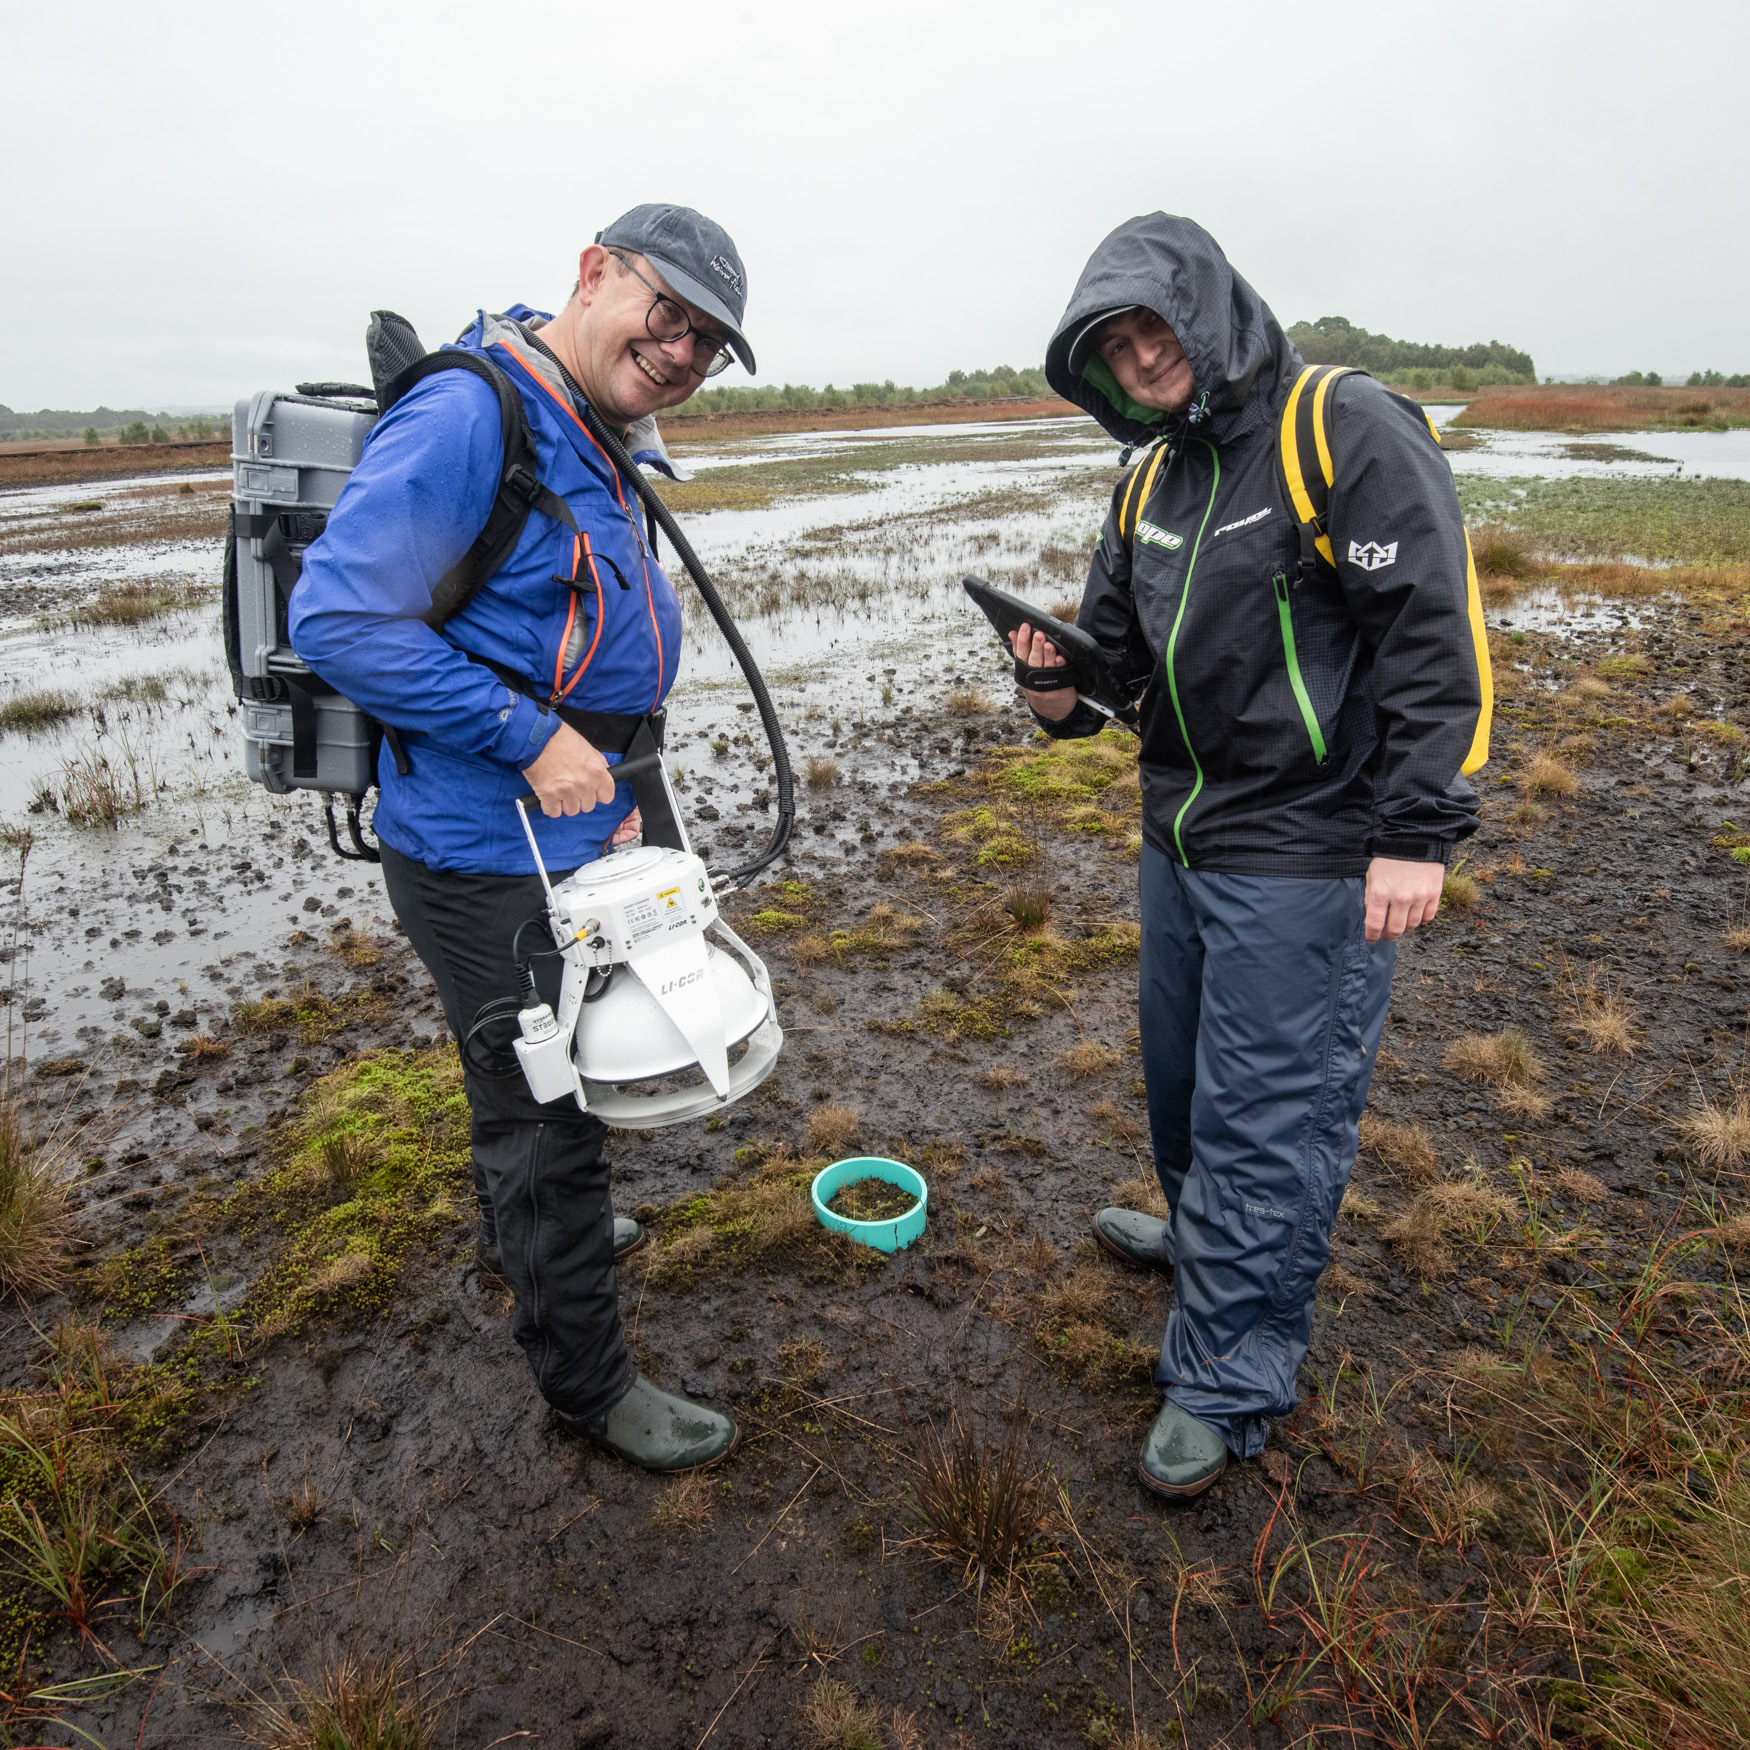 Two men in raincoats stand on a wet bog and look at the camera; the man on the left holds a white object, which is a monitor he will use to measure carbon dioxide and methane emissions